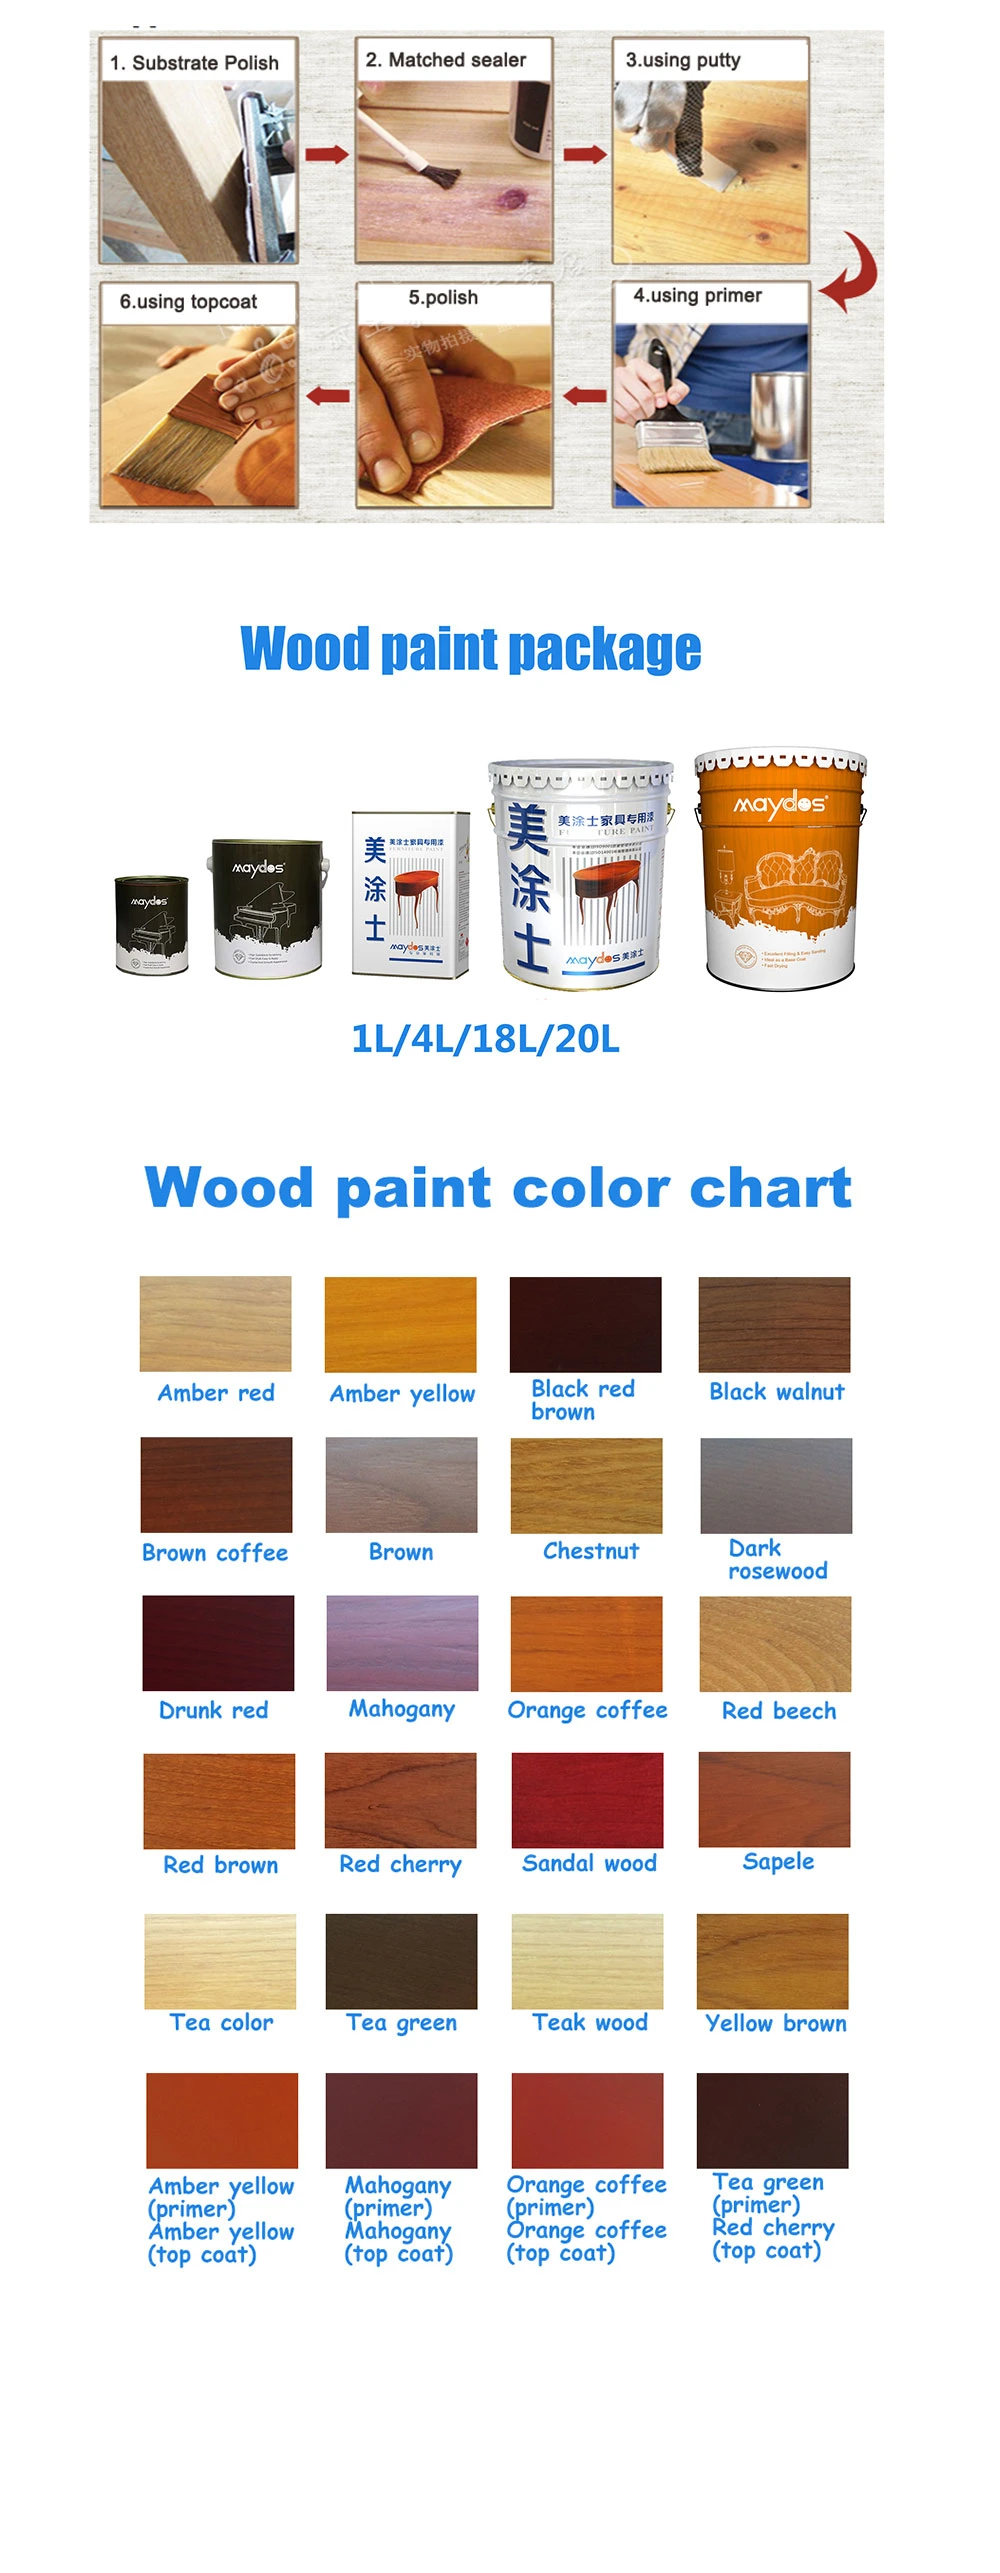 Maydos Flat Abrasion Resistant Fast Drying Wood Paint